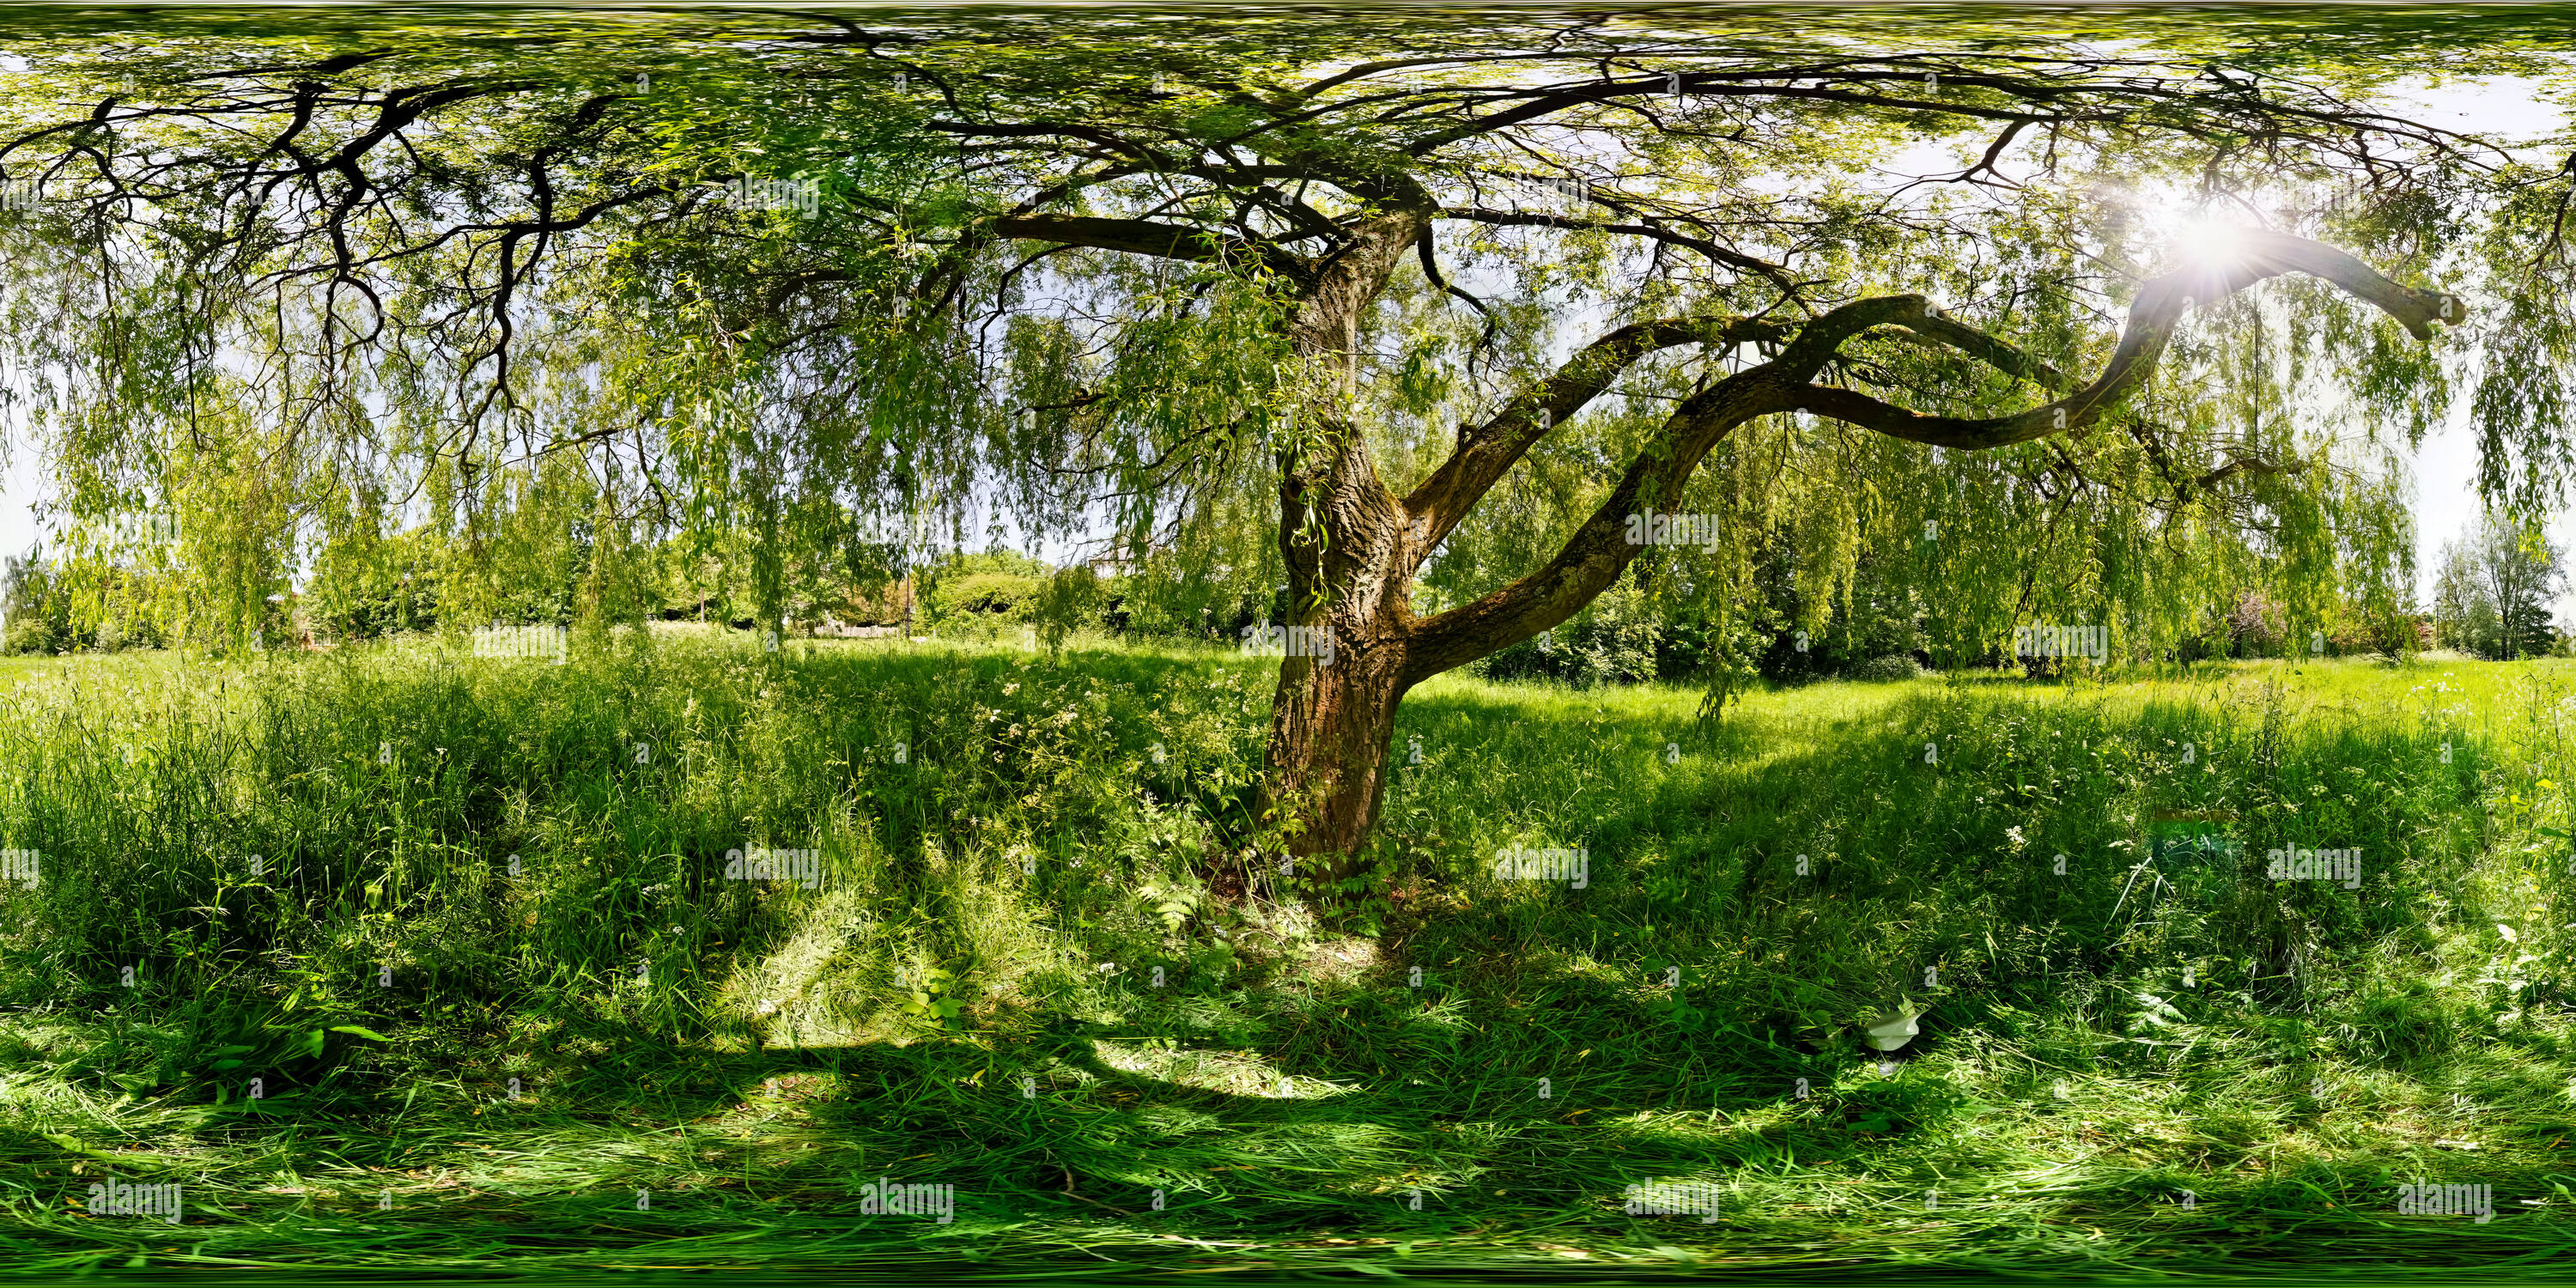 360 degree panoramic view of Under the Willow Tree, Totteridge Green